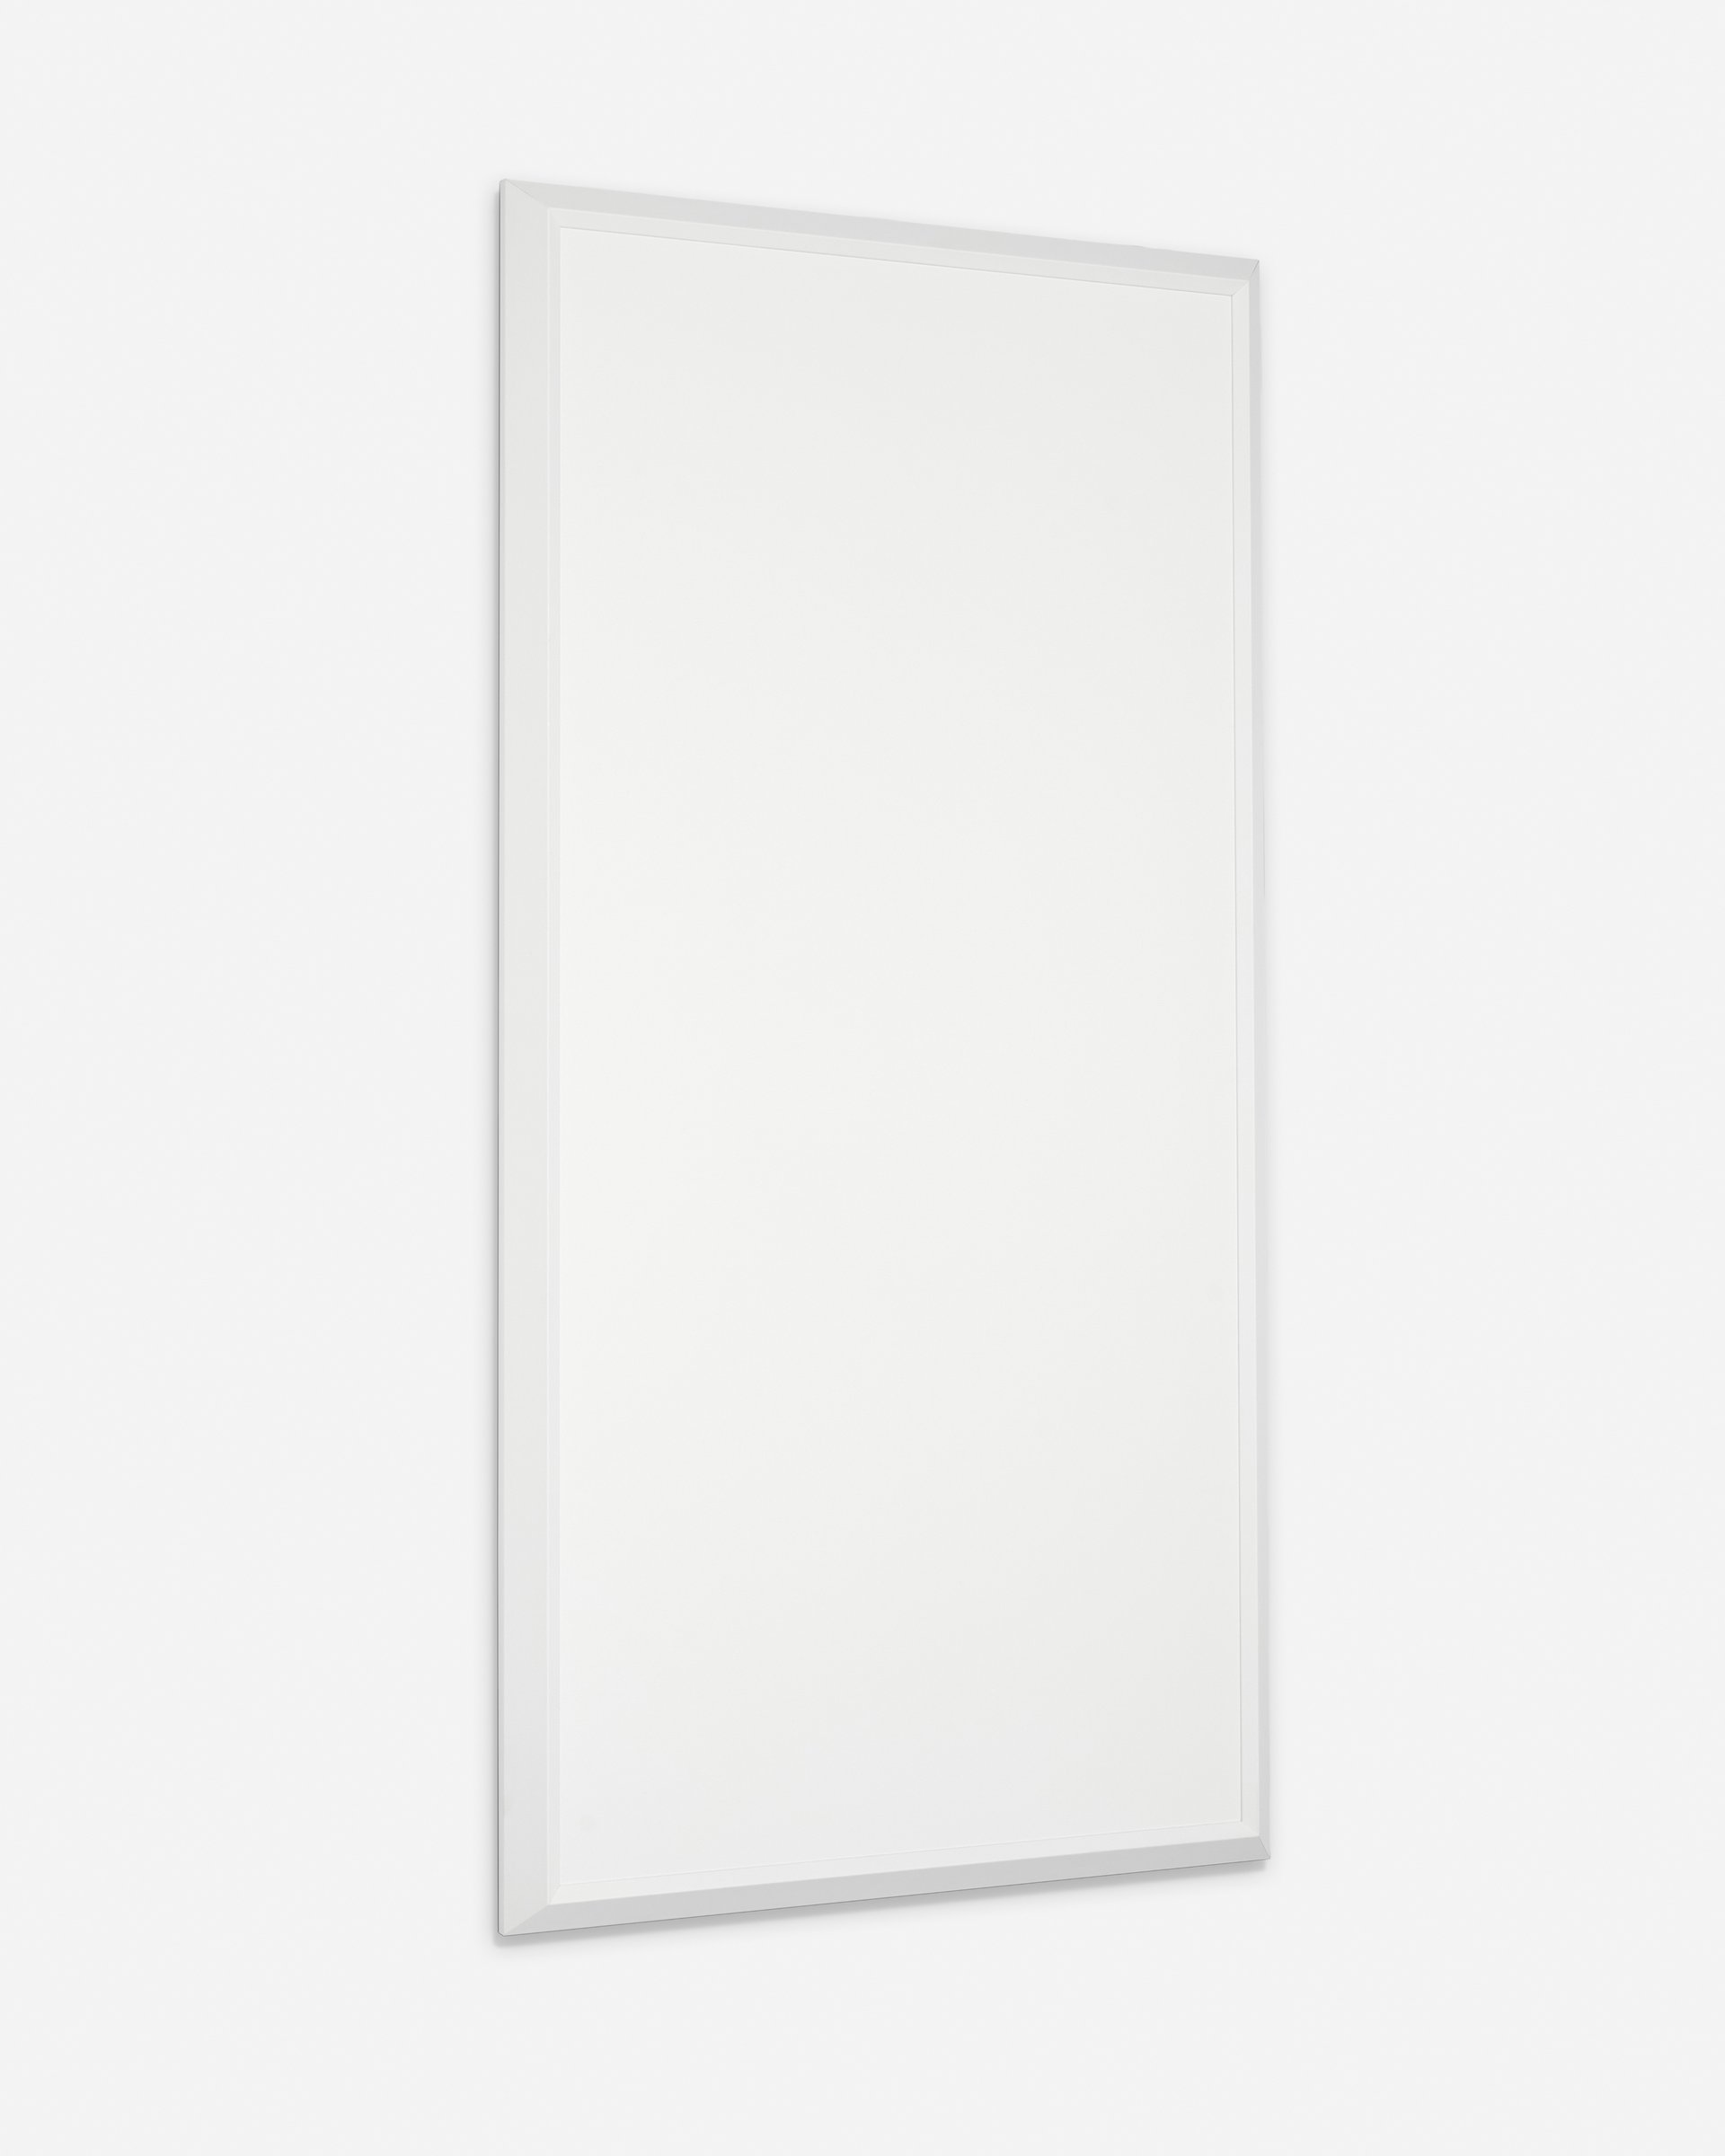 Gaylen GerberSupport, n.d.Oil paint on mirror with metal frame, United States, 20th century76 x 38 x 2.5 cm